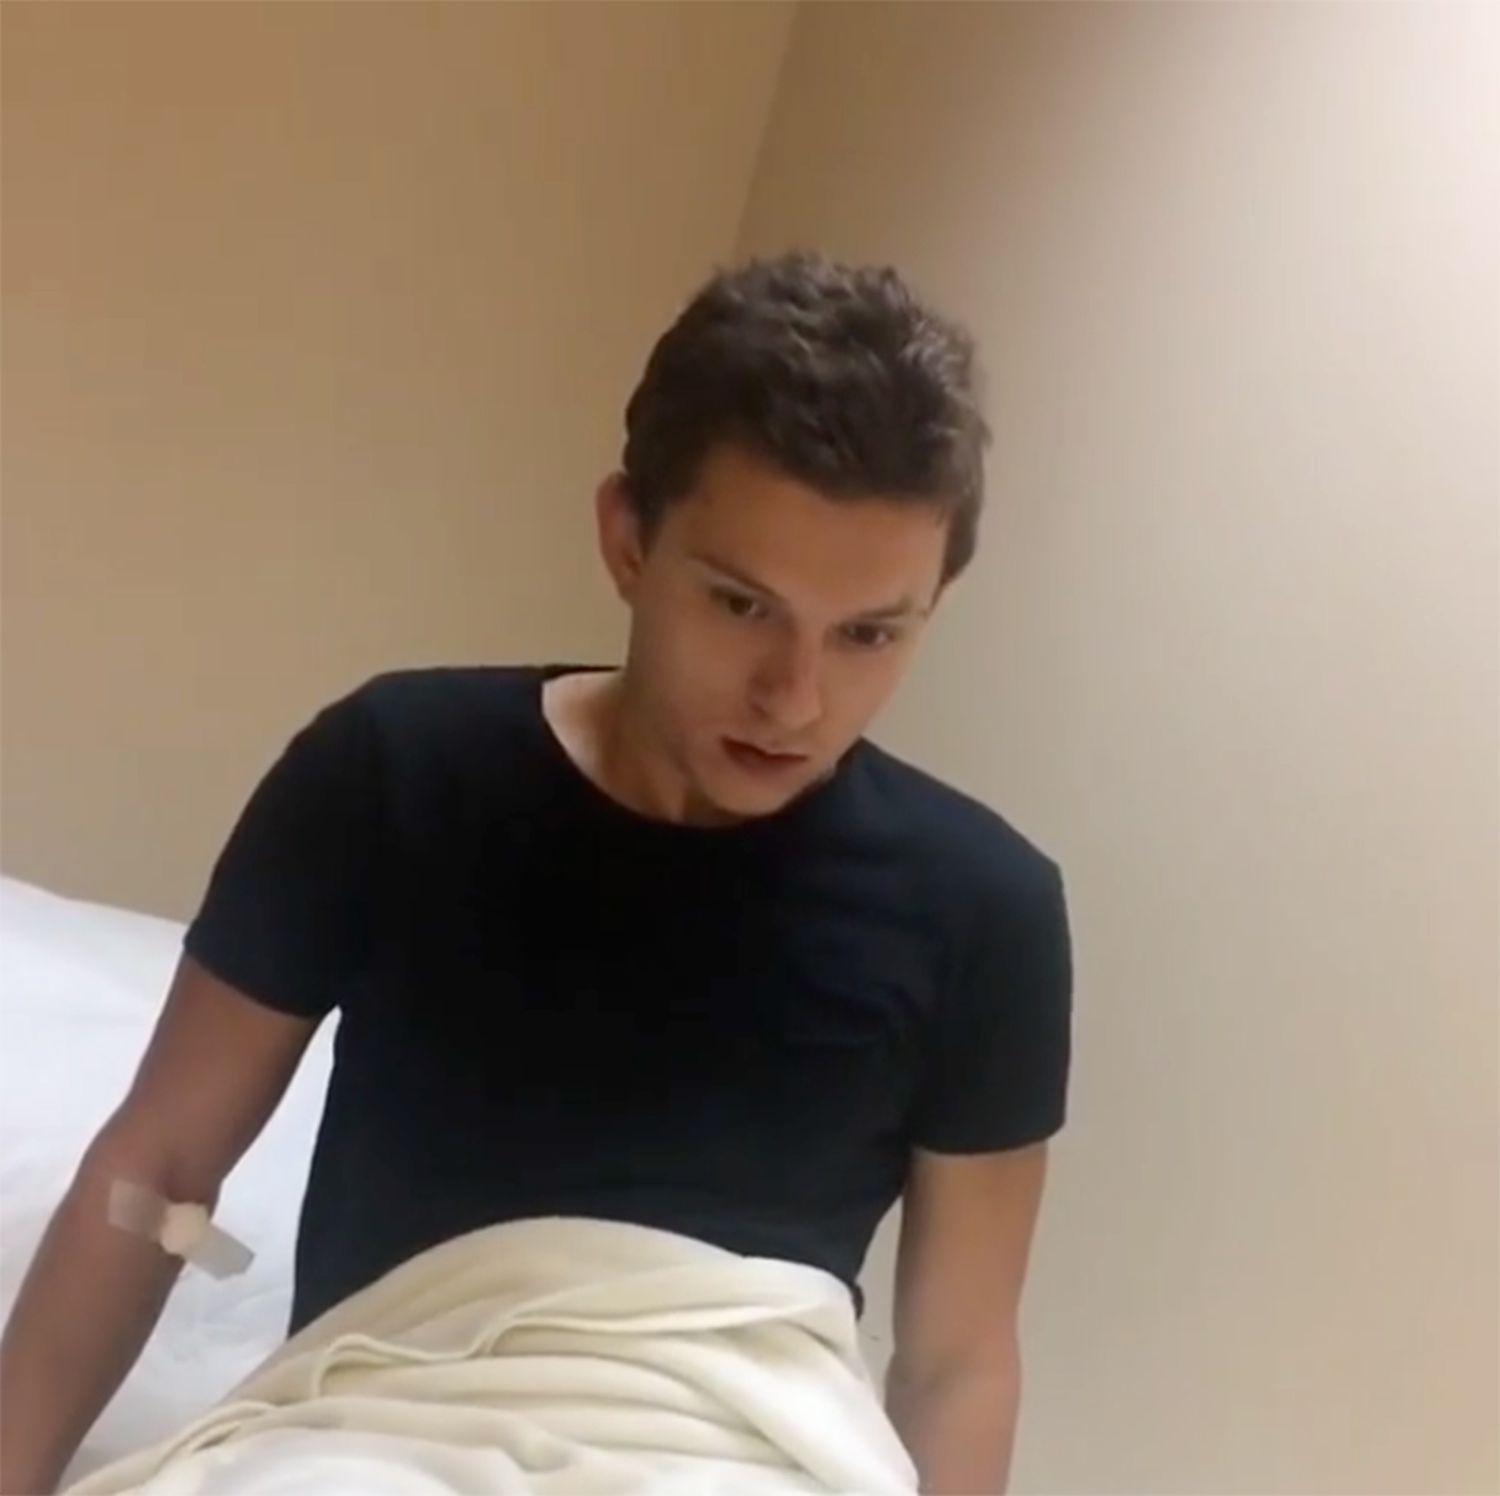 WATCH: Tom Holland's Spidey Senses Take a Hit After He Had His Wisdom Tooth...